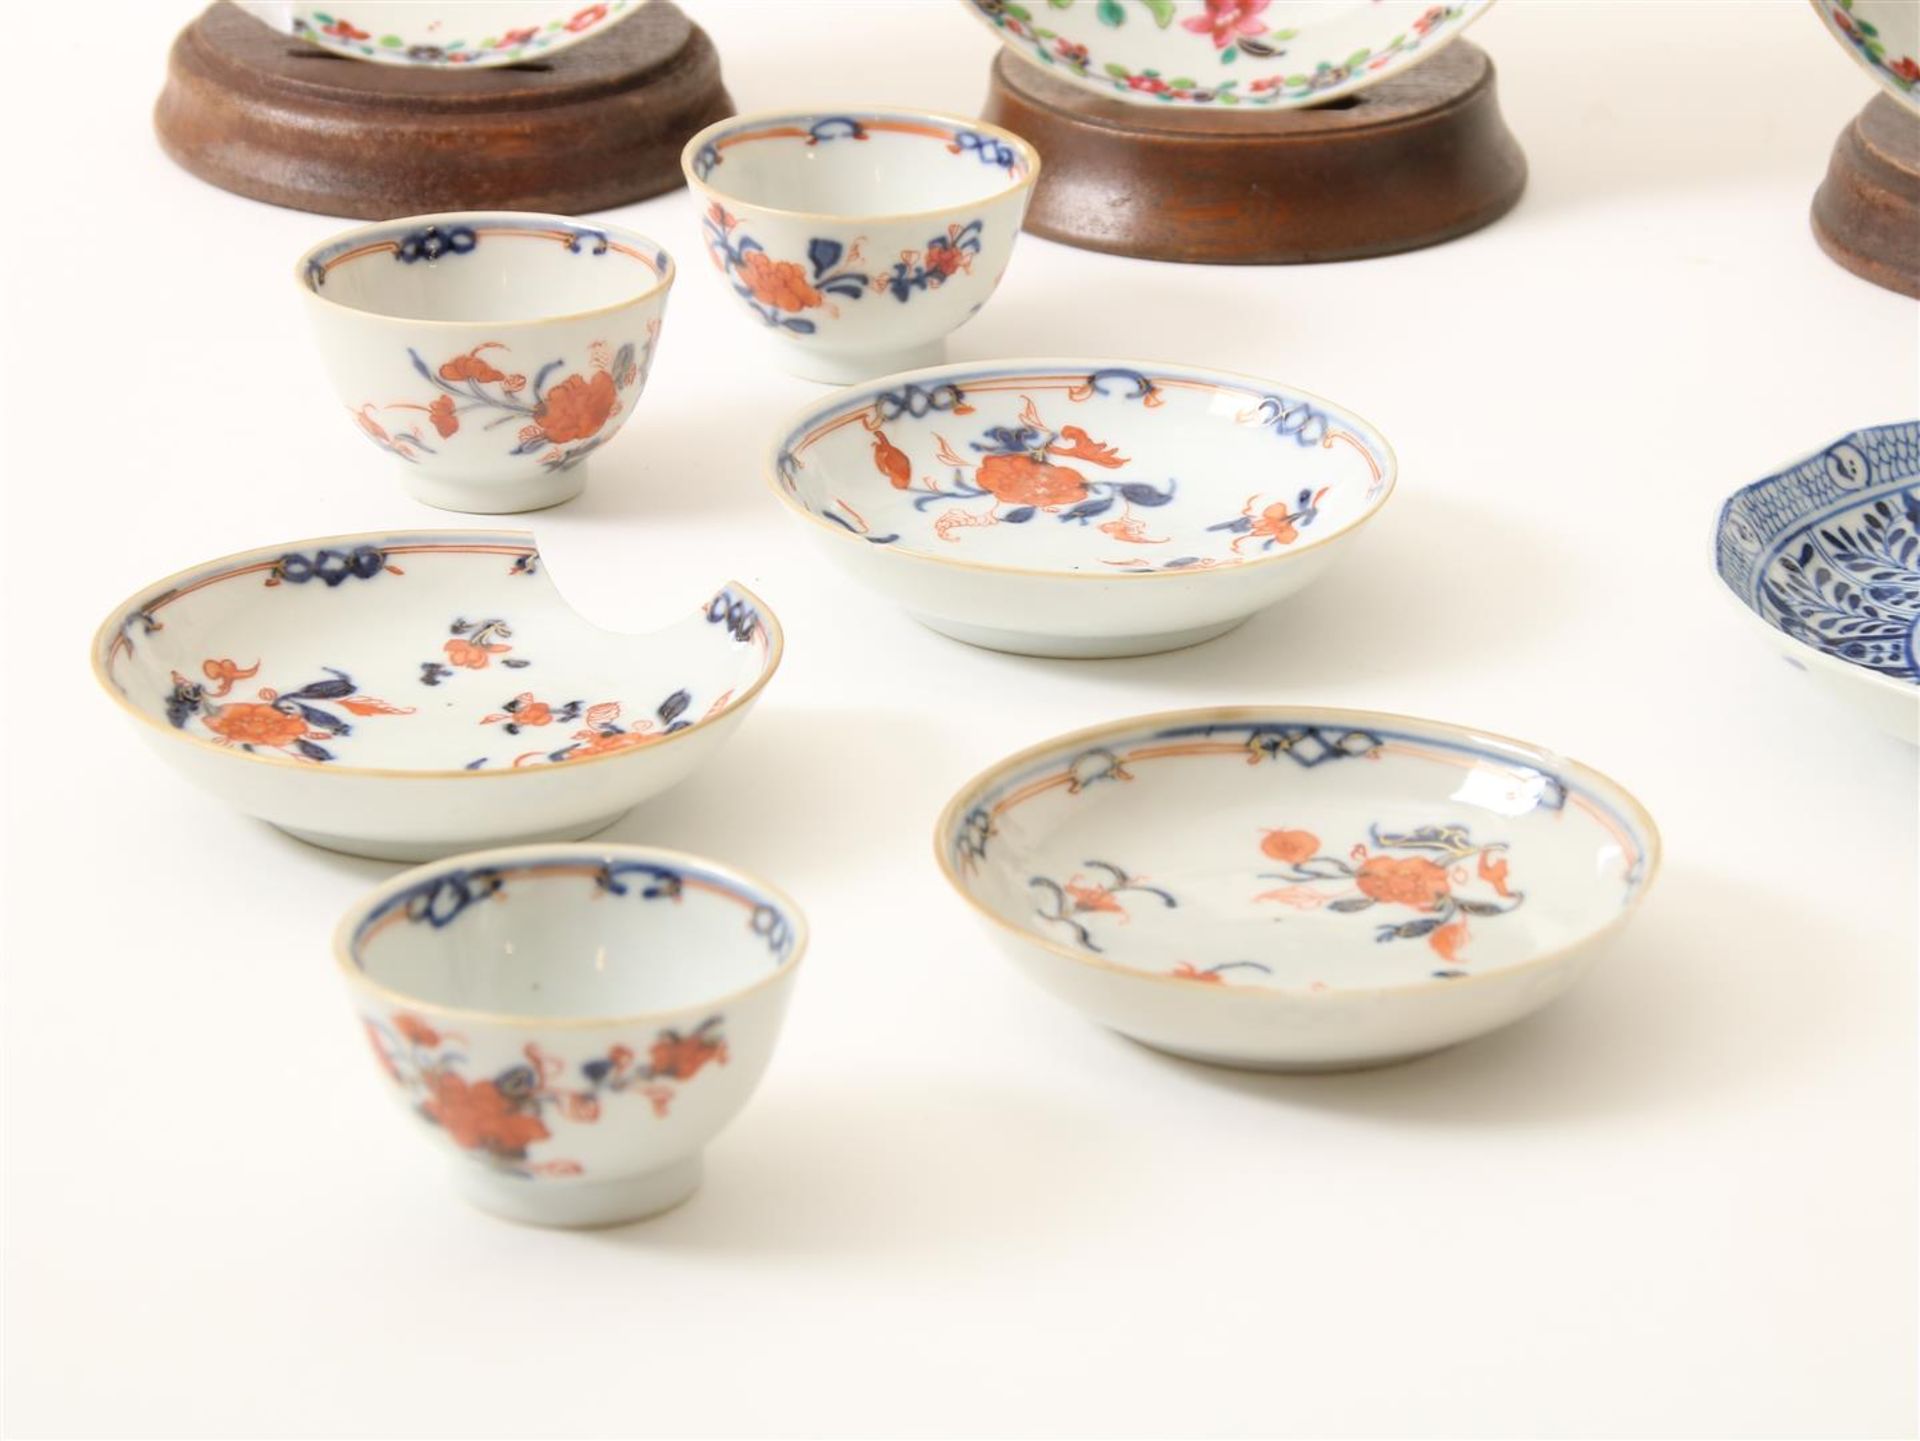 Series of 5 Qianlong cups and saucers with flower decor, China 18th century (3 saucers and 1 cup - Image 2 of 6